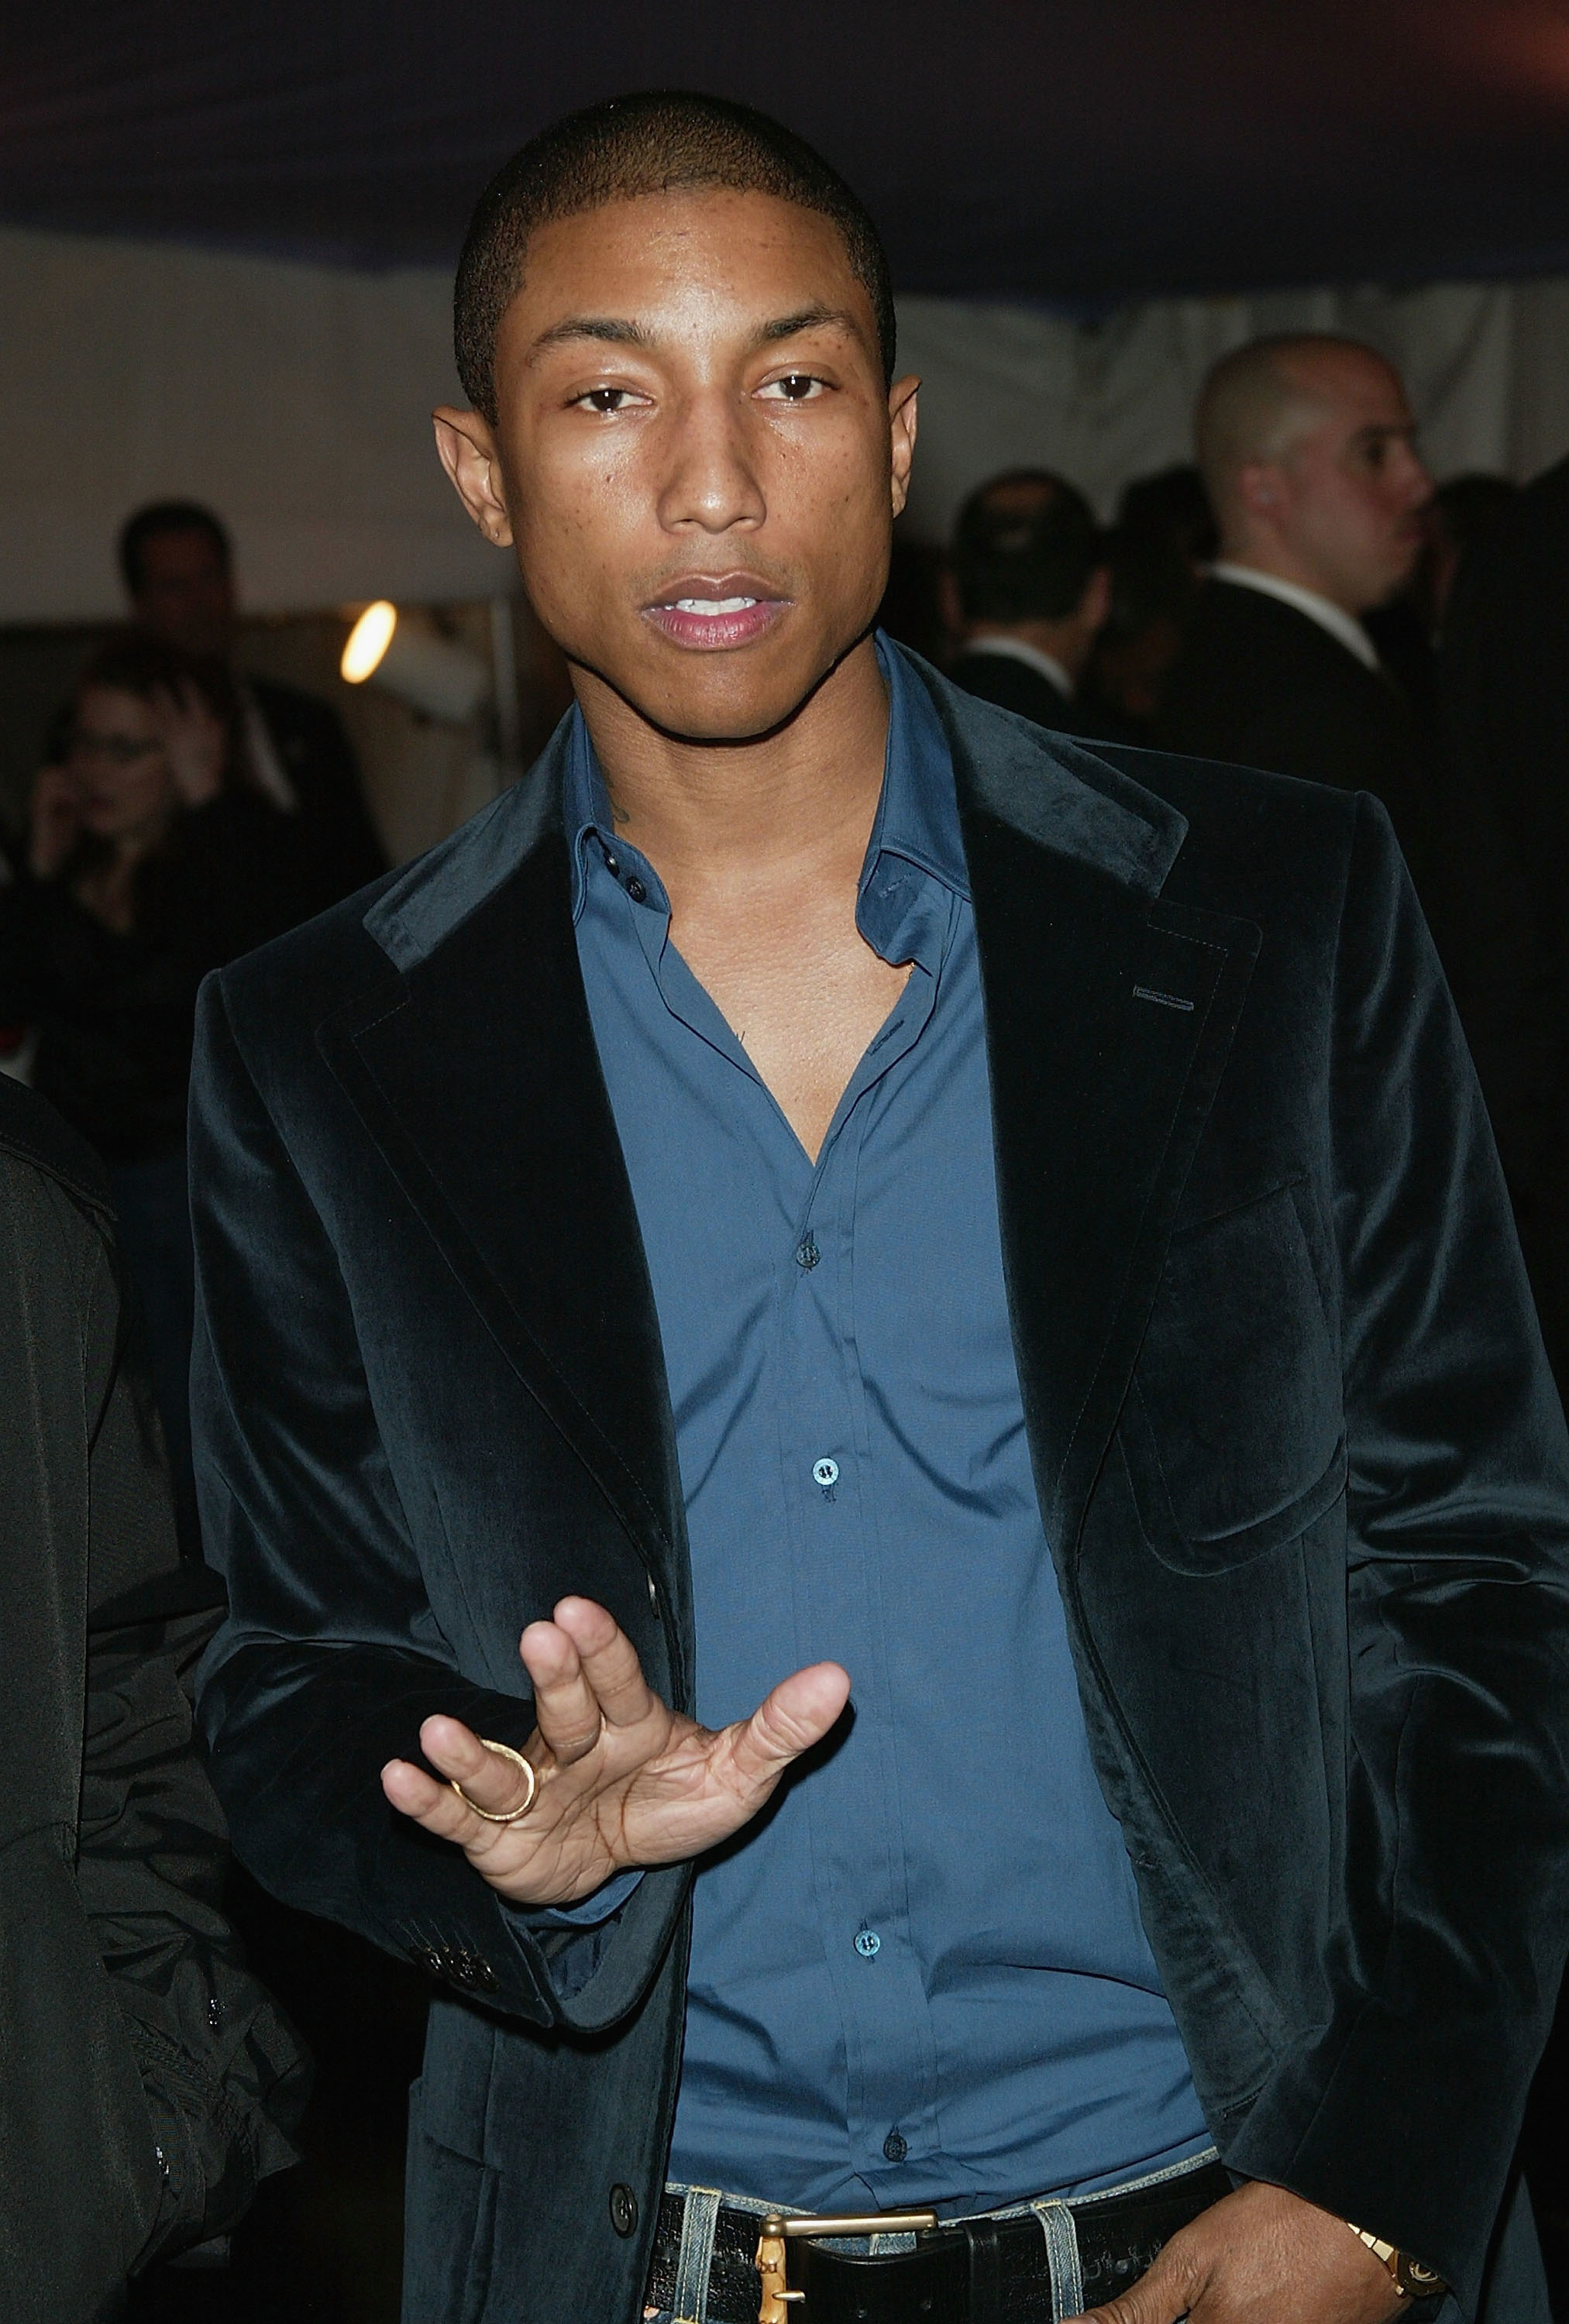 Pharrell Williams in a velvet jacket and collared shirt, gesturing with his hand, at an event